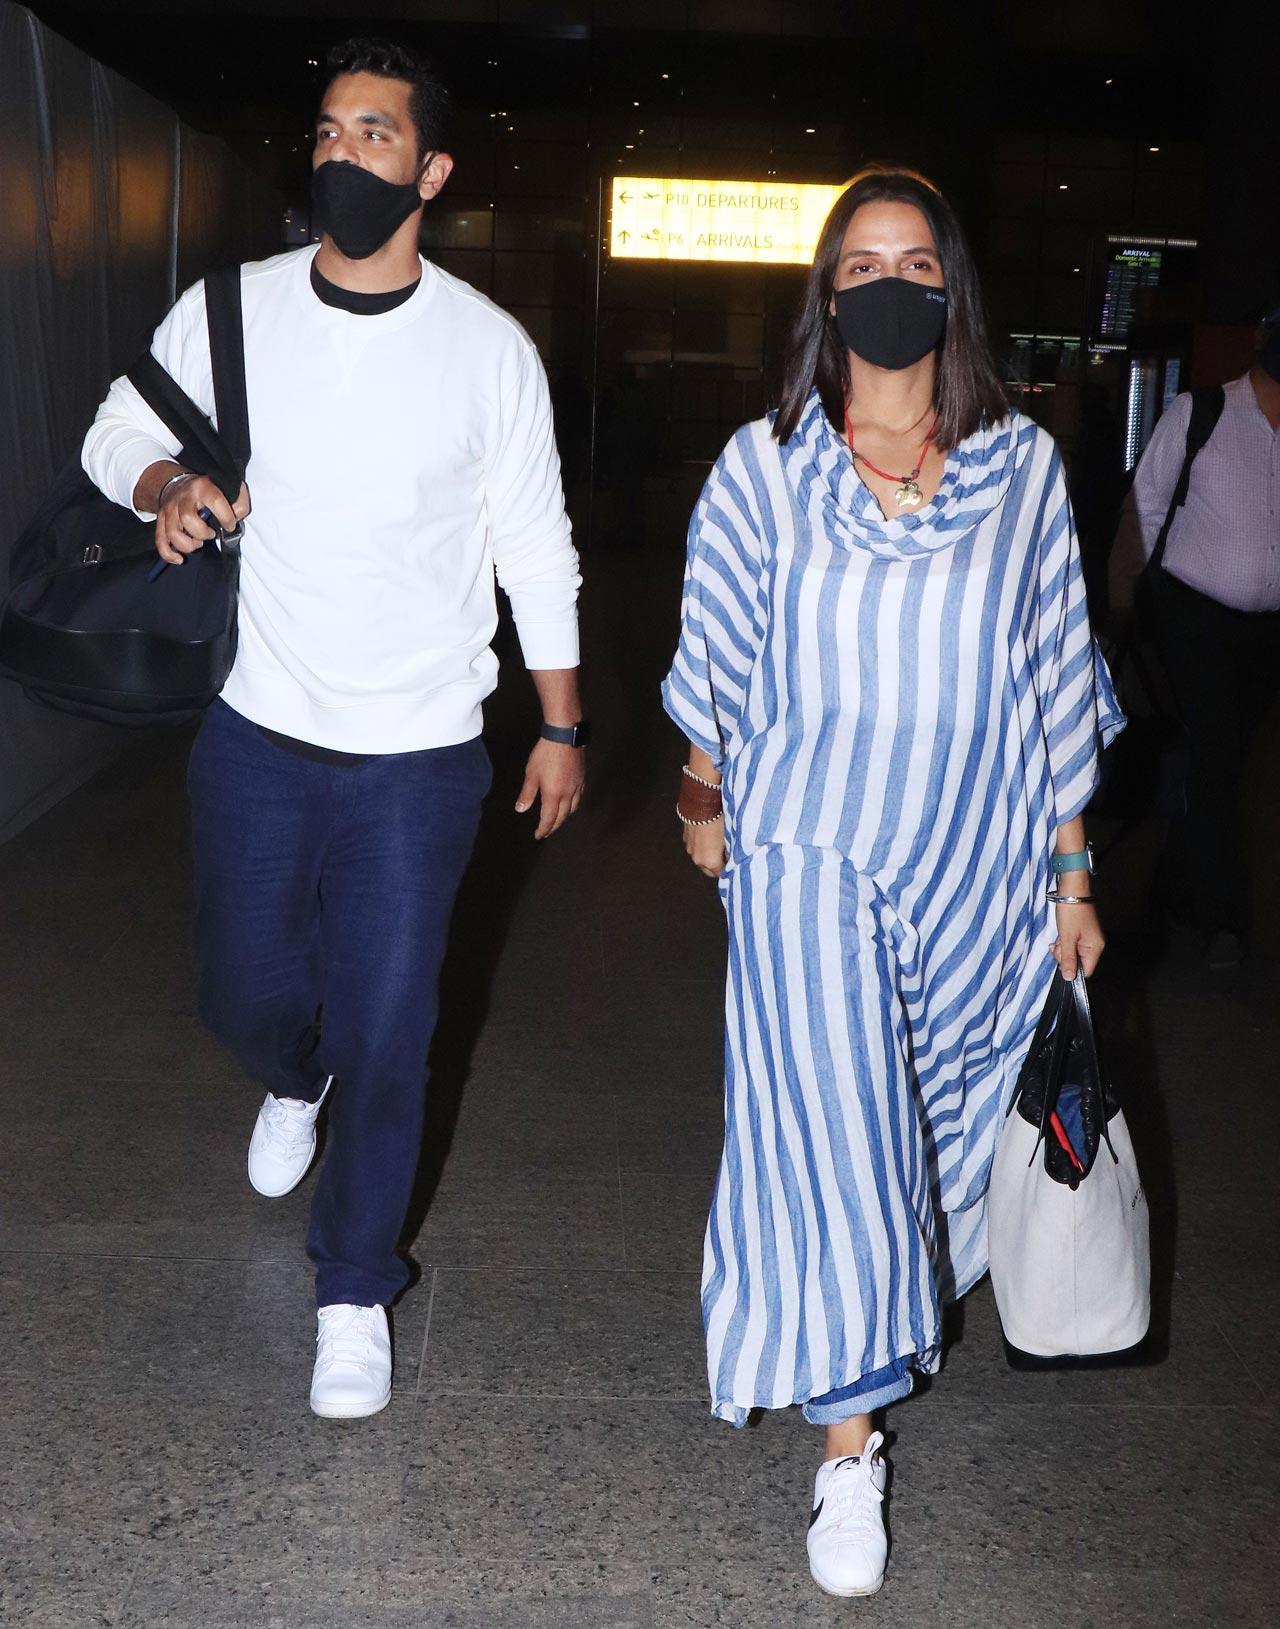 Neha Dhupia and Angad Bedi were clicked at the Mumbai airport. While Angad kept it casual in a white tee and denim, Neha wore a kaftan top and denim as they arrived at the airport.